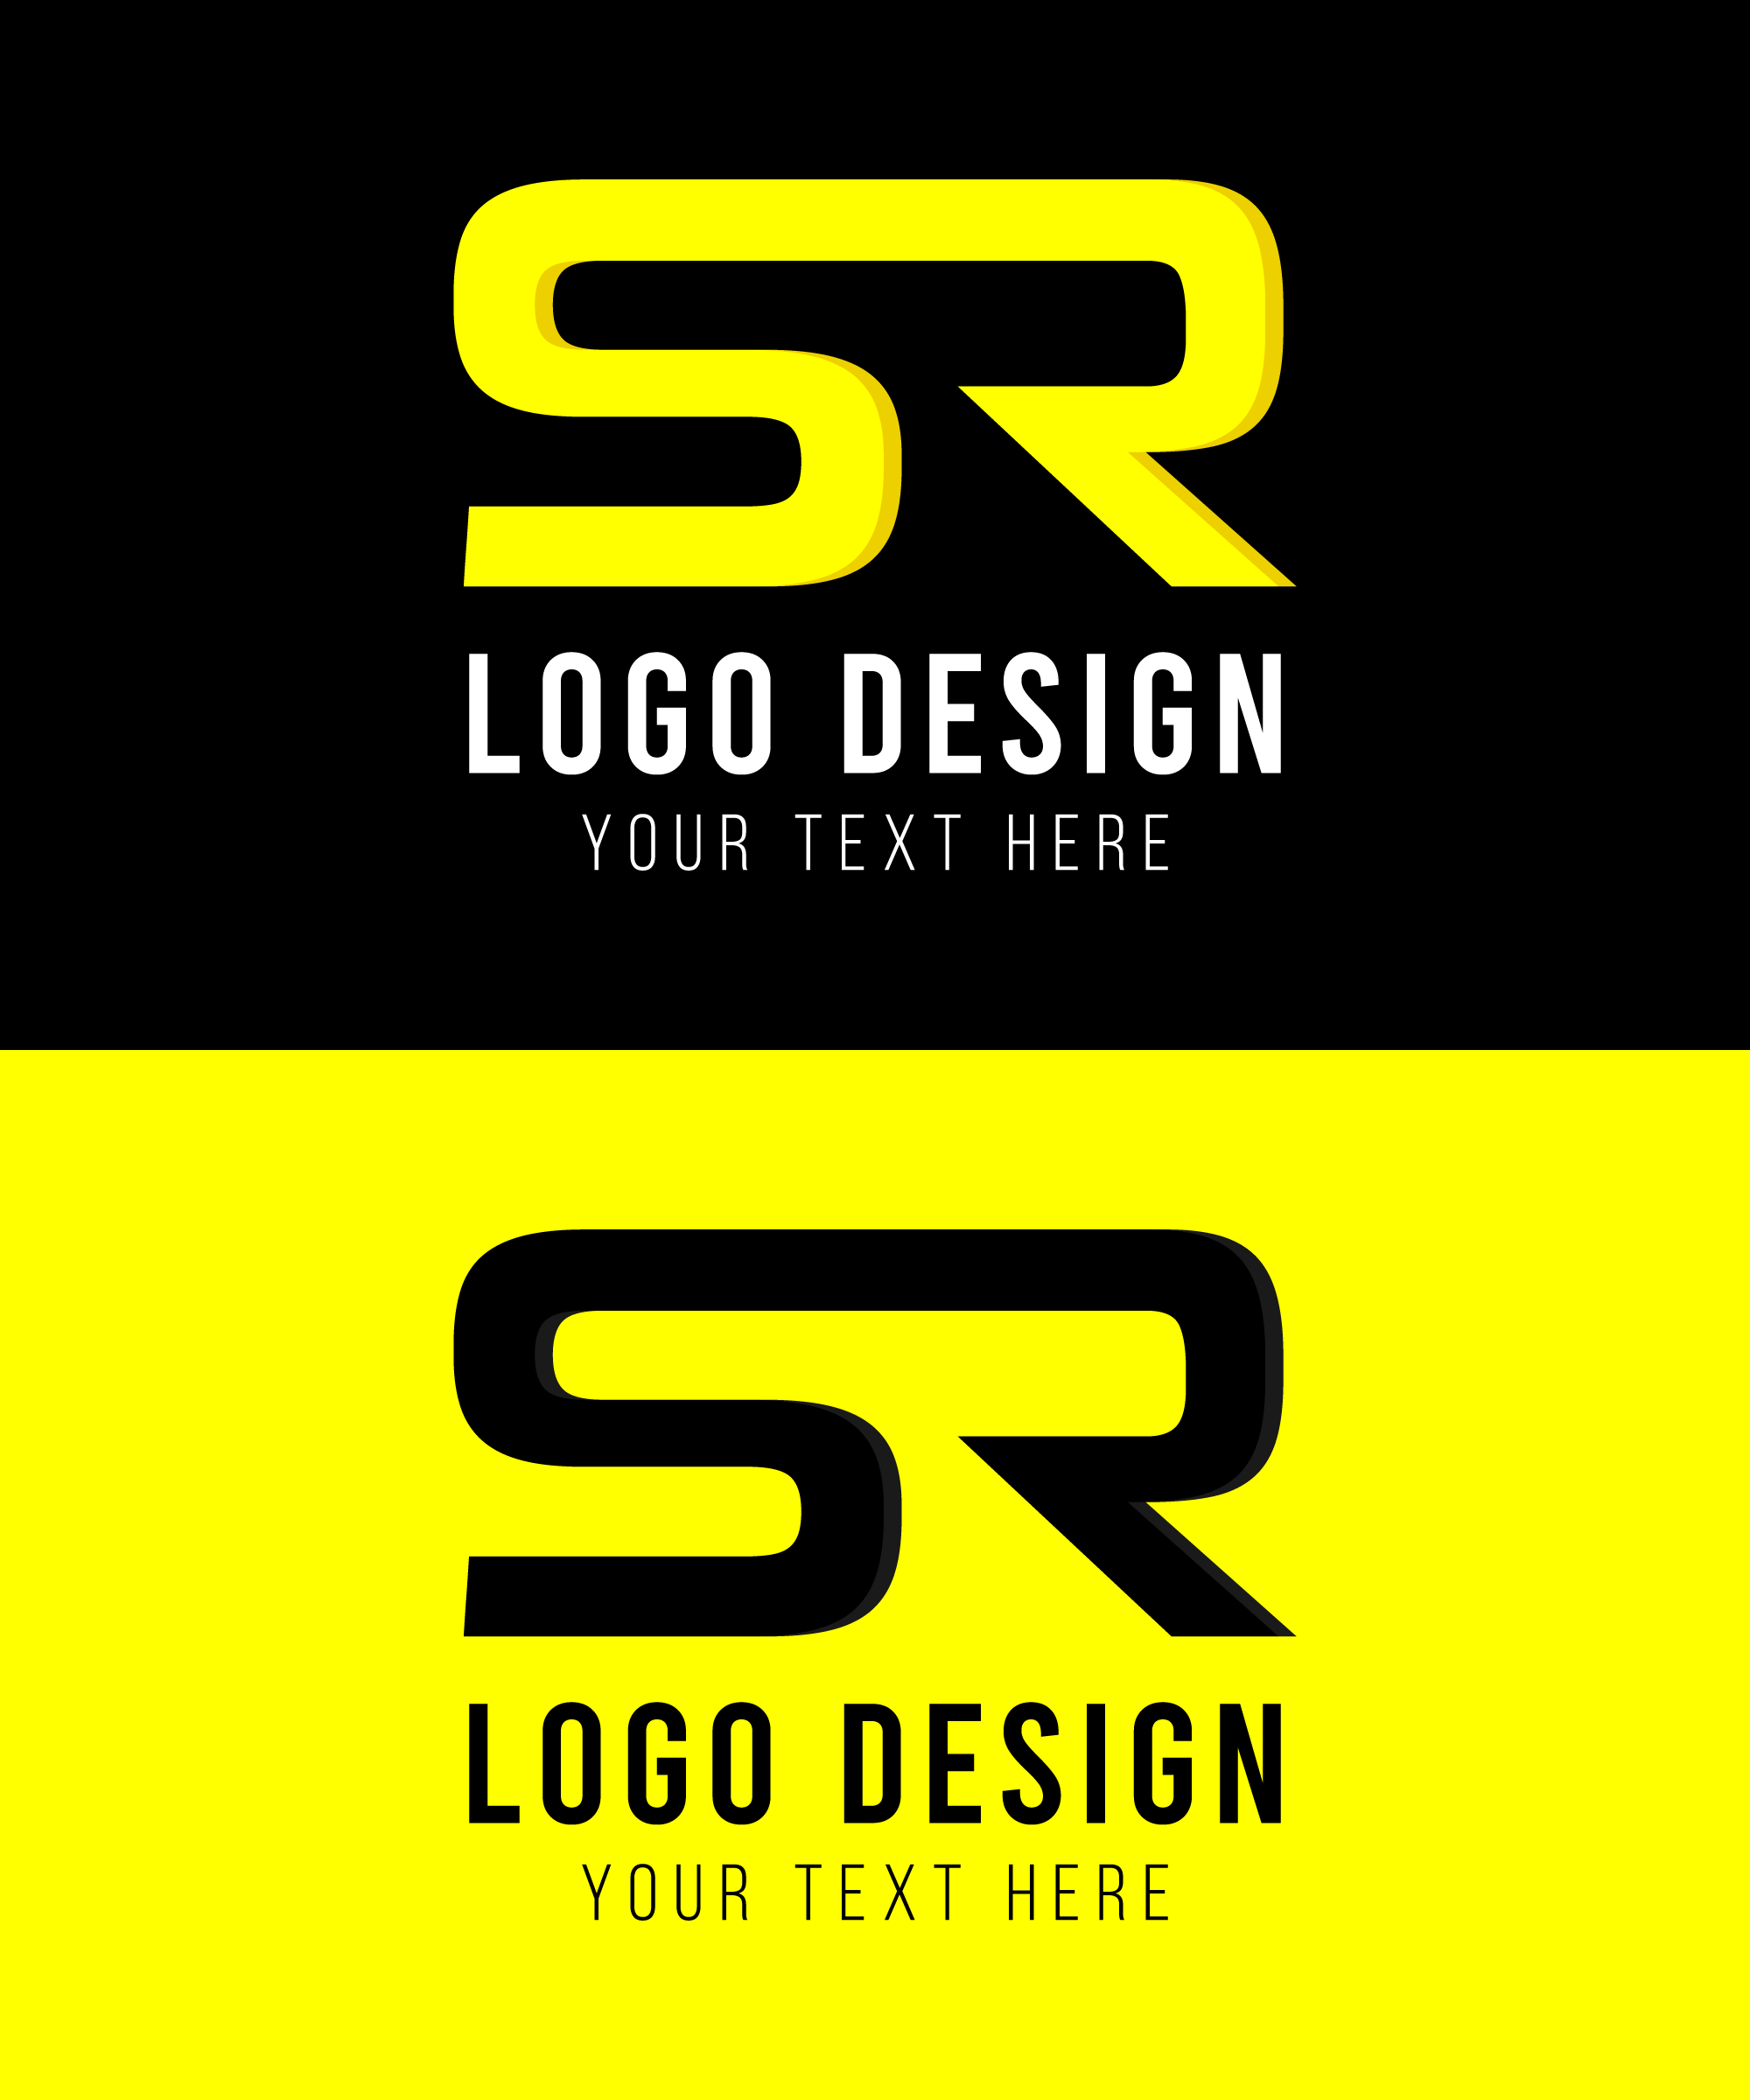 3D Logo Service at best price in Moradabad | ID: 24811886533